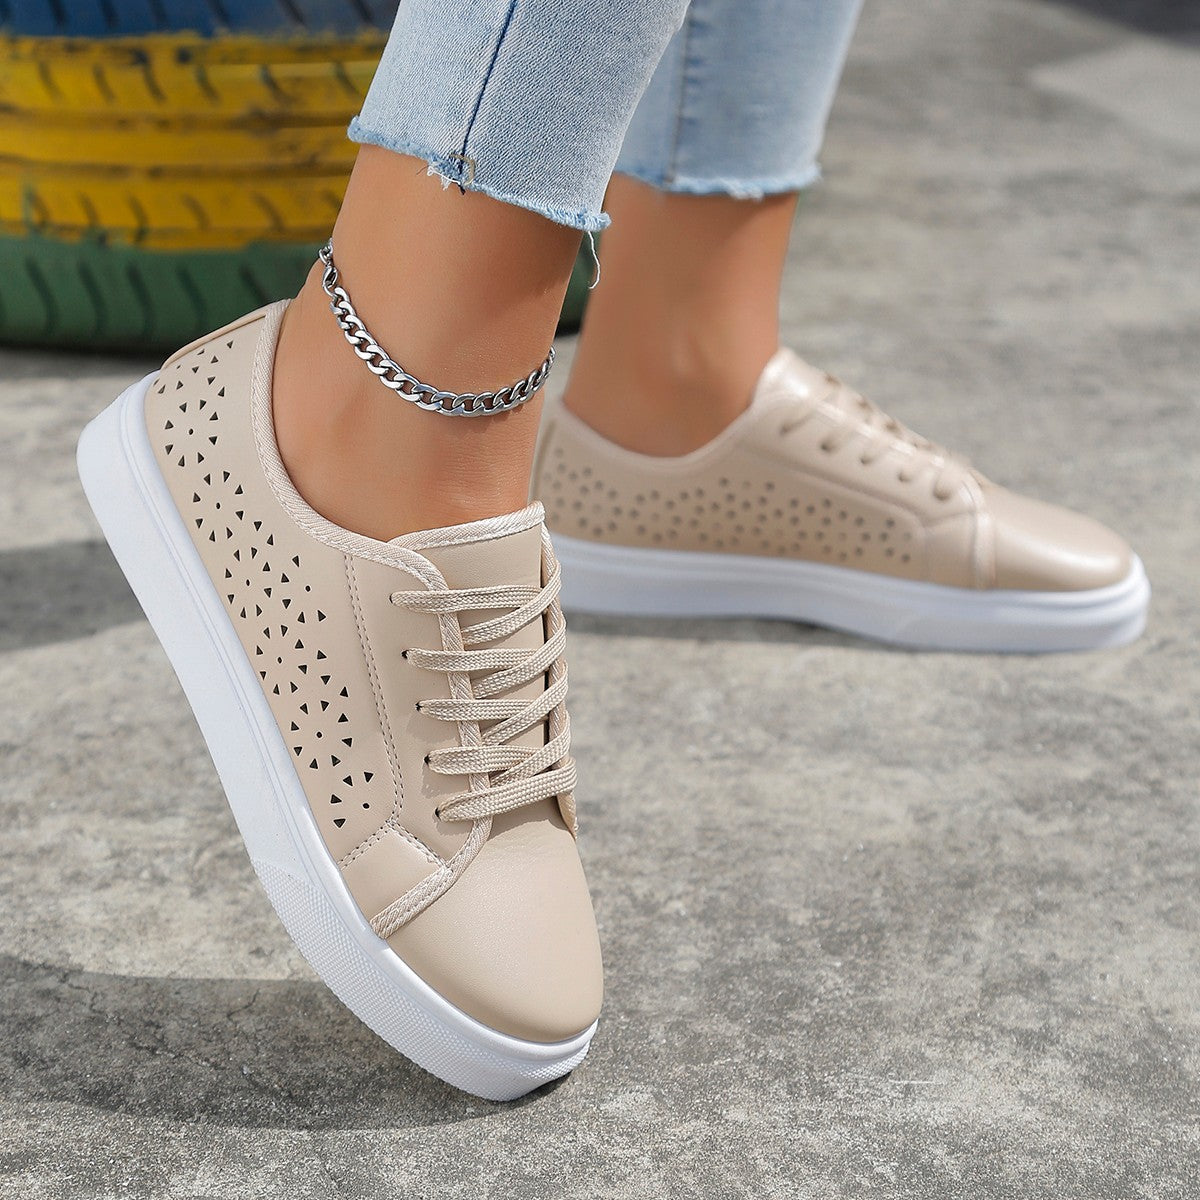 sneakers  | Cutout Flat Shoes Lace-up Hollow Out Walking Shoes For Women Loafers | Apricot |  36.| thecurvestory.myshopify.com